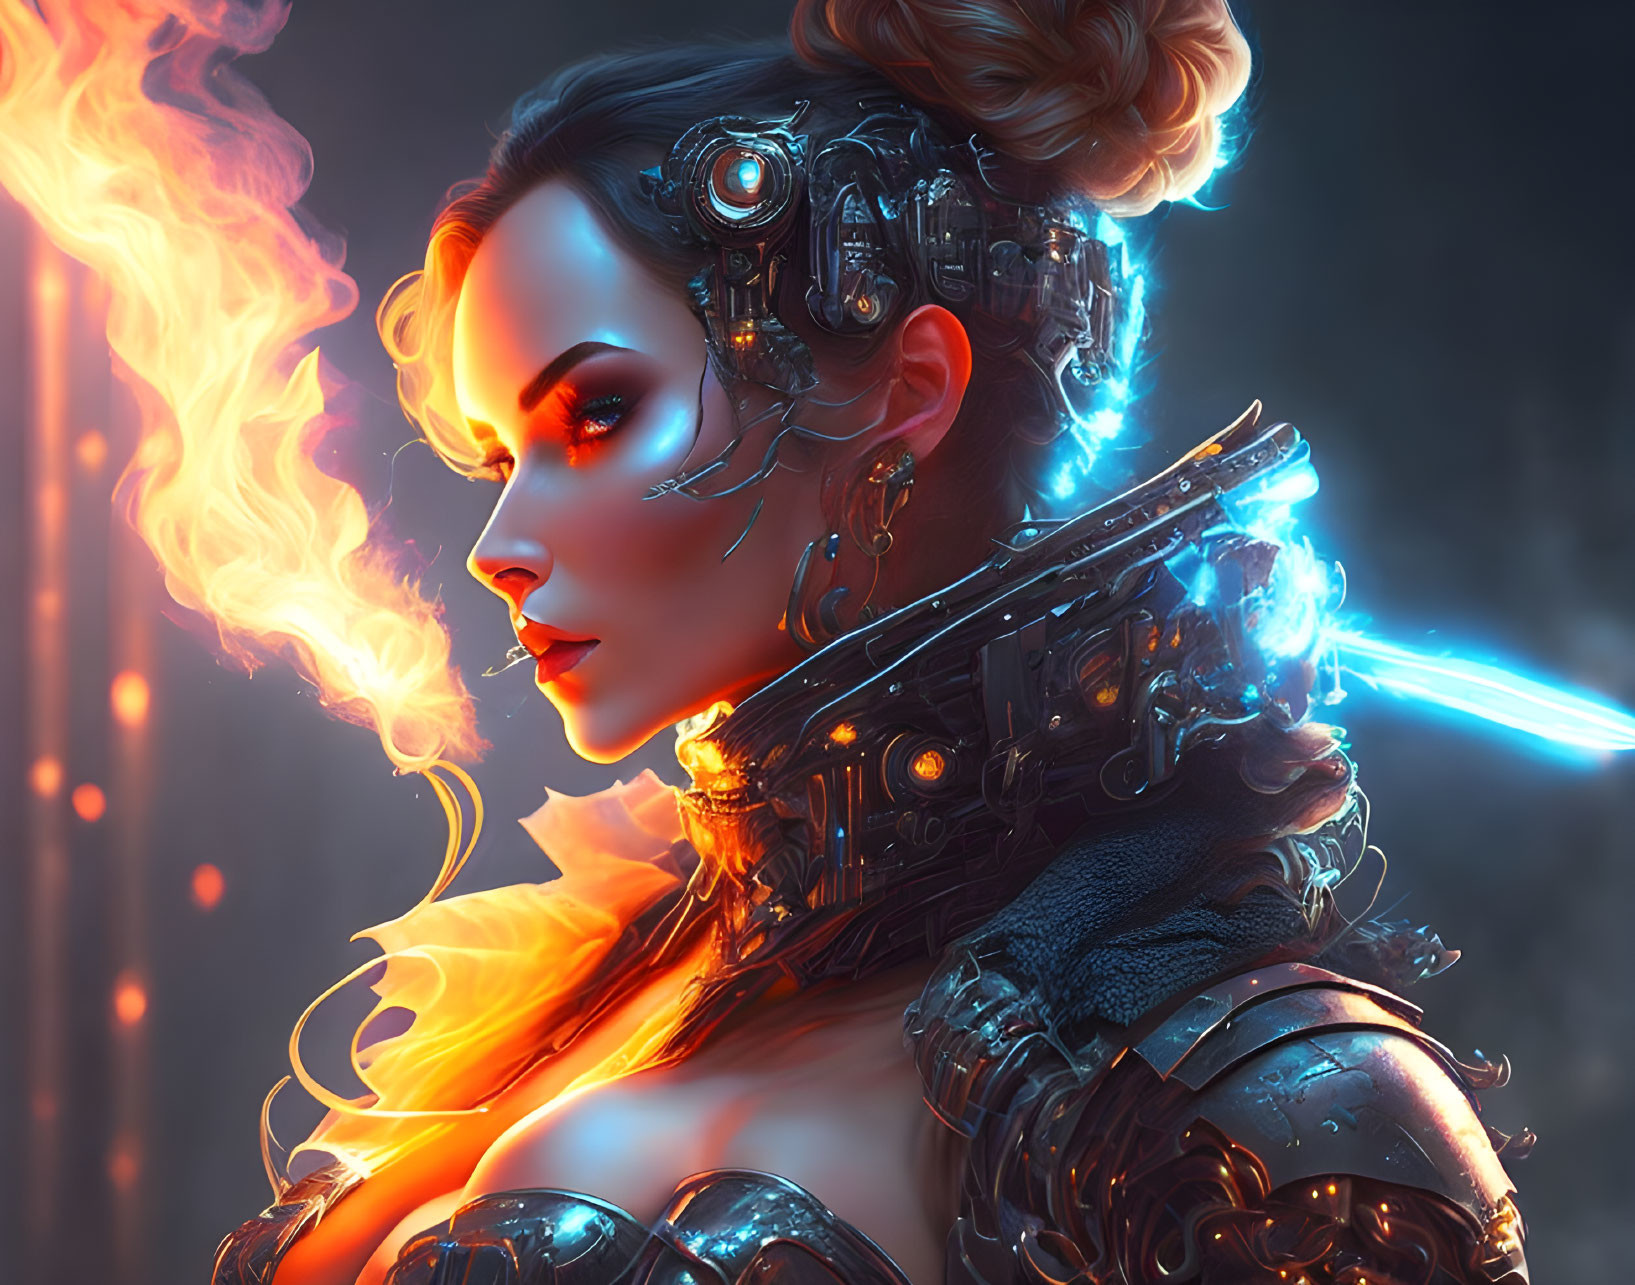 Female Cyborg with Glowing Blue and Fiery Orange Elements